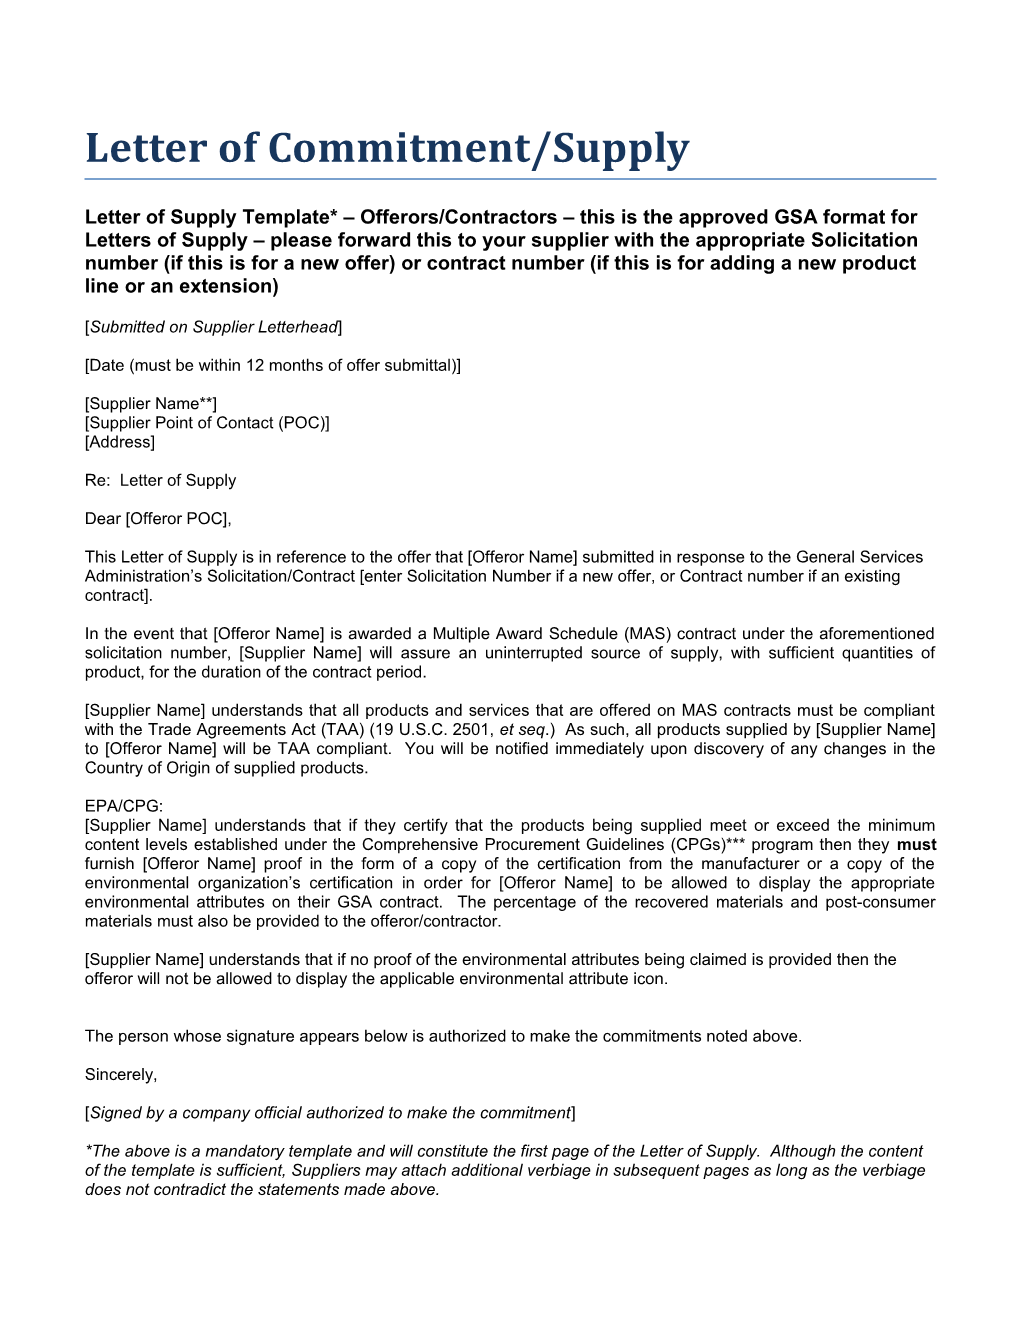 Letter of Commitment/Supply